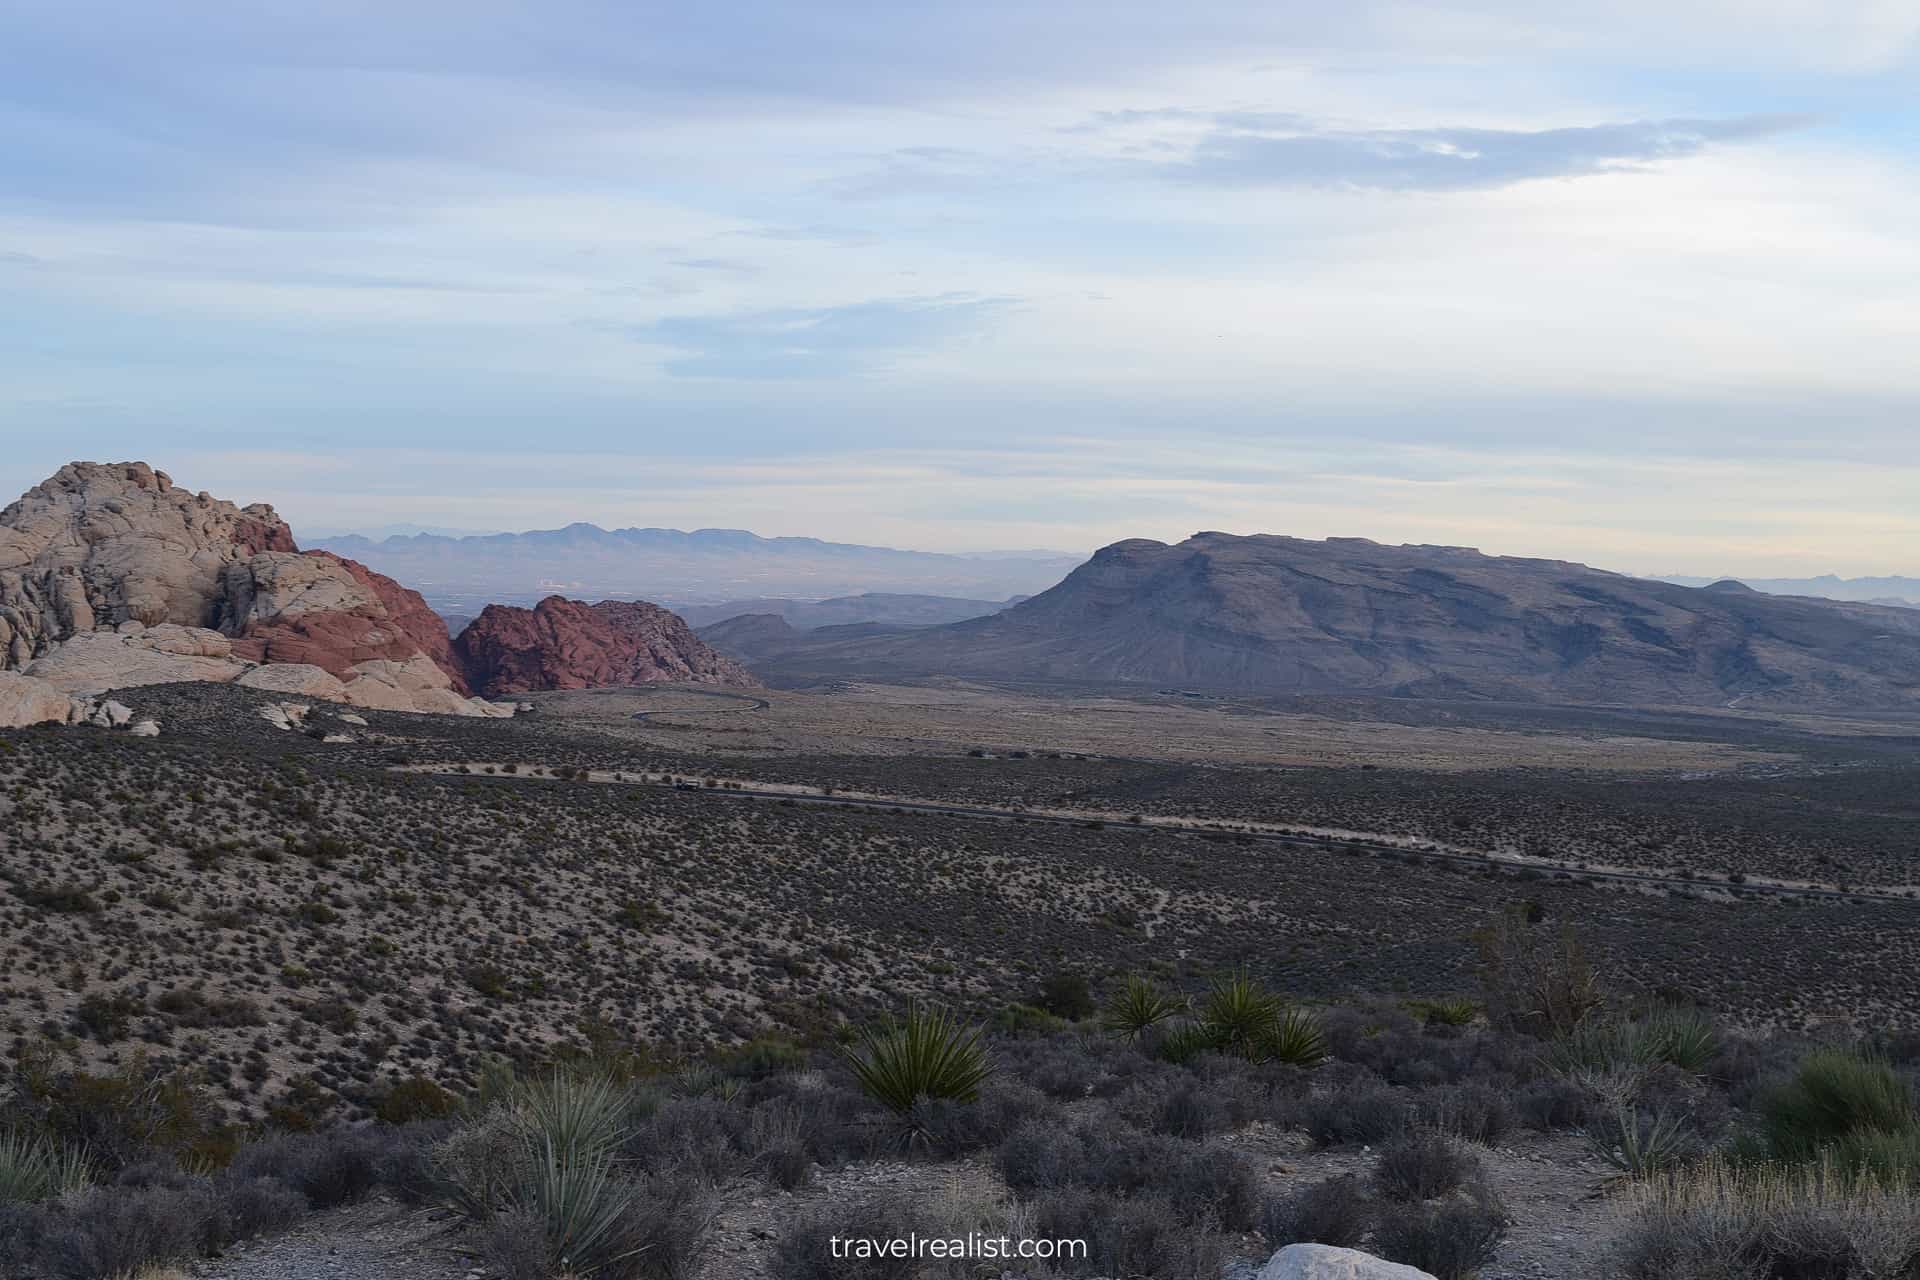 Panoramic views from High Point Overlook with Las Vegas in distance in Red Rock Canyon National Conservation Area, Nevada, US